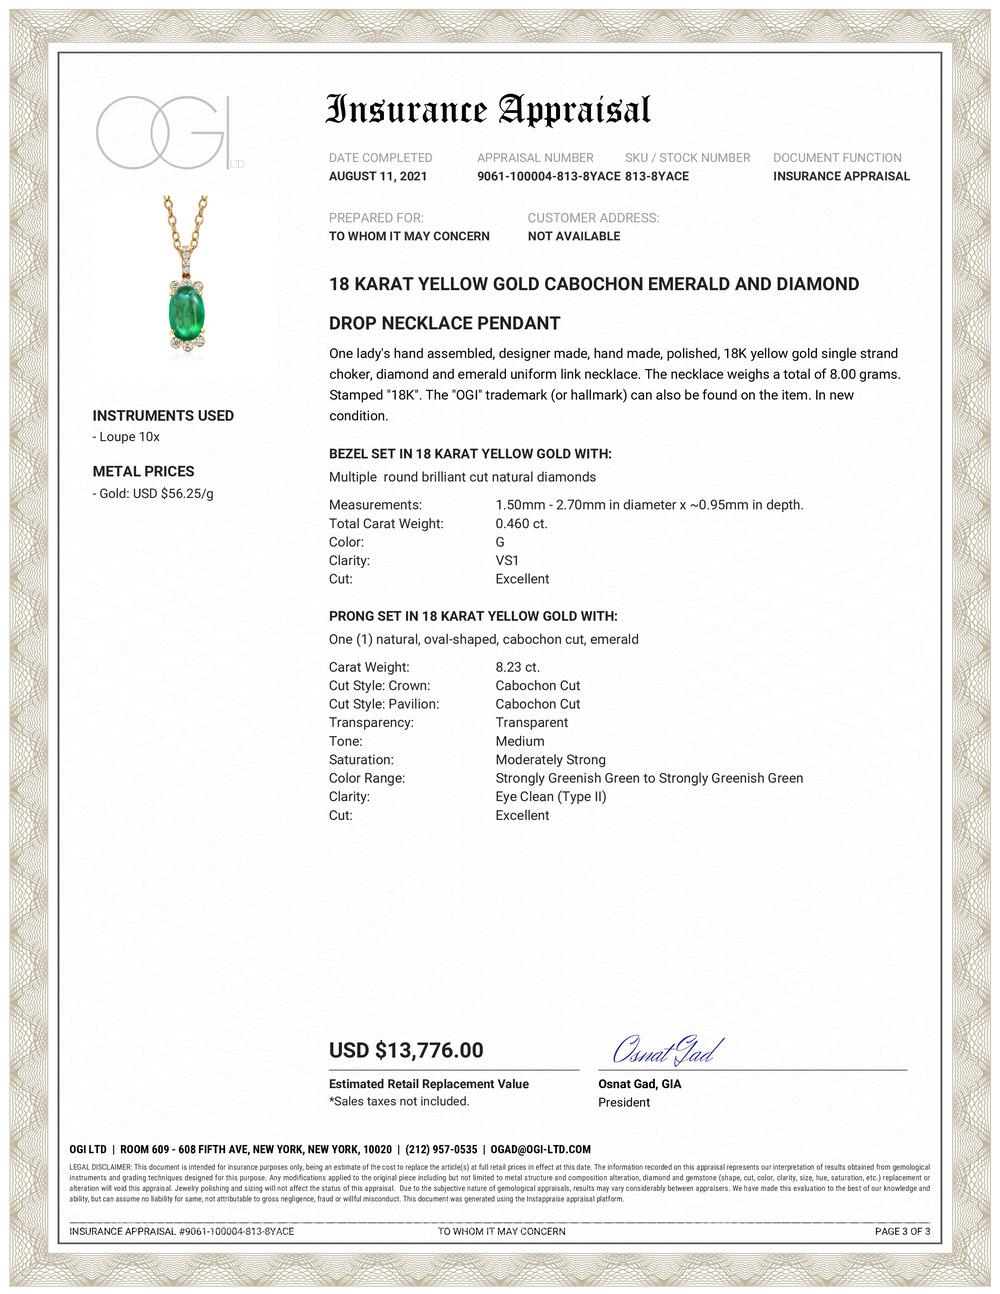 Eighteen karats yellow and white gold necklace pendant with Colombia cabochon emerald
Necklace measuring 18 inch 
Colombia cabochon emerald weighing 8.23 carats
Round diamonds weighing 0.46 carats
Emerald hue tone color is emerald grass green
Wide